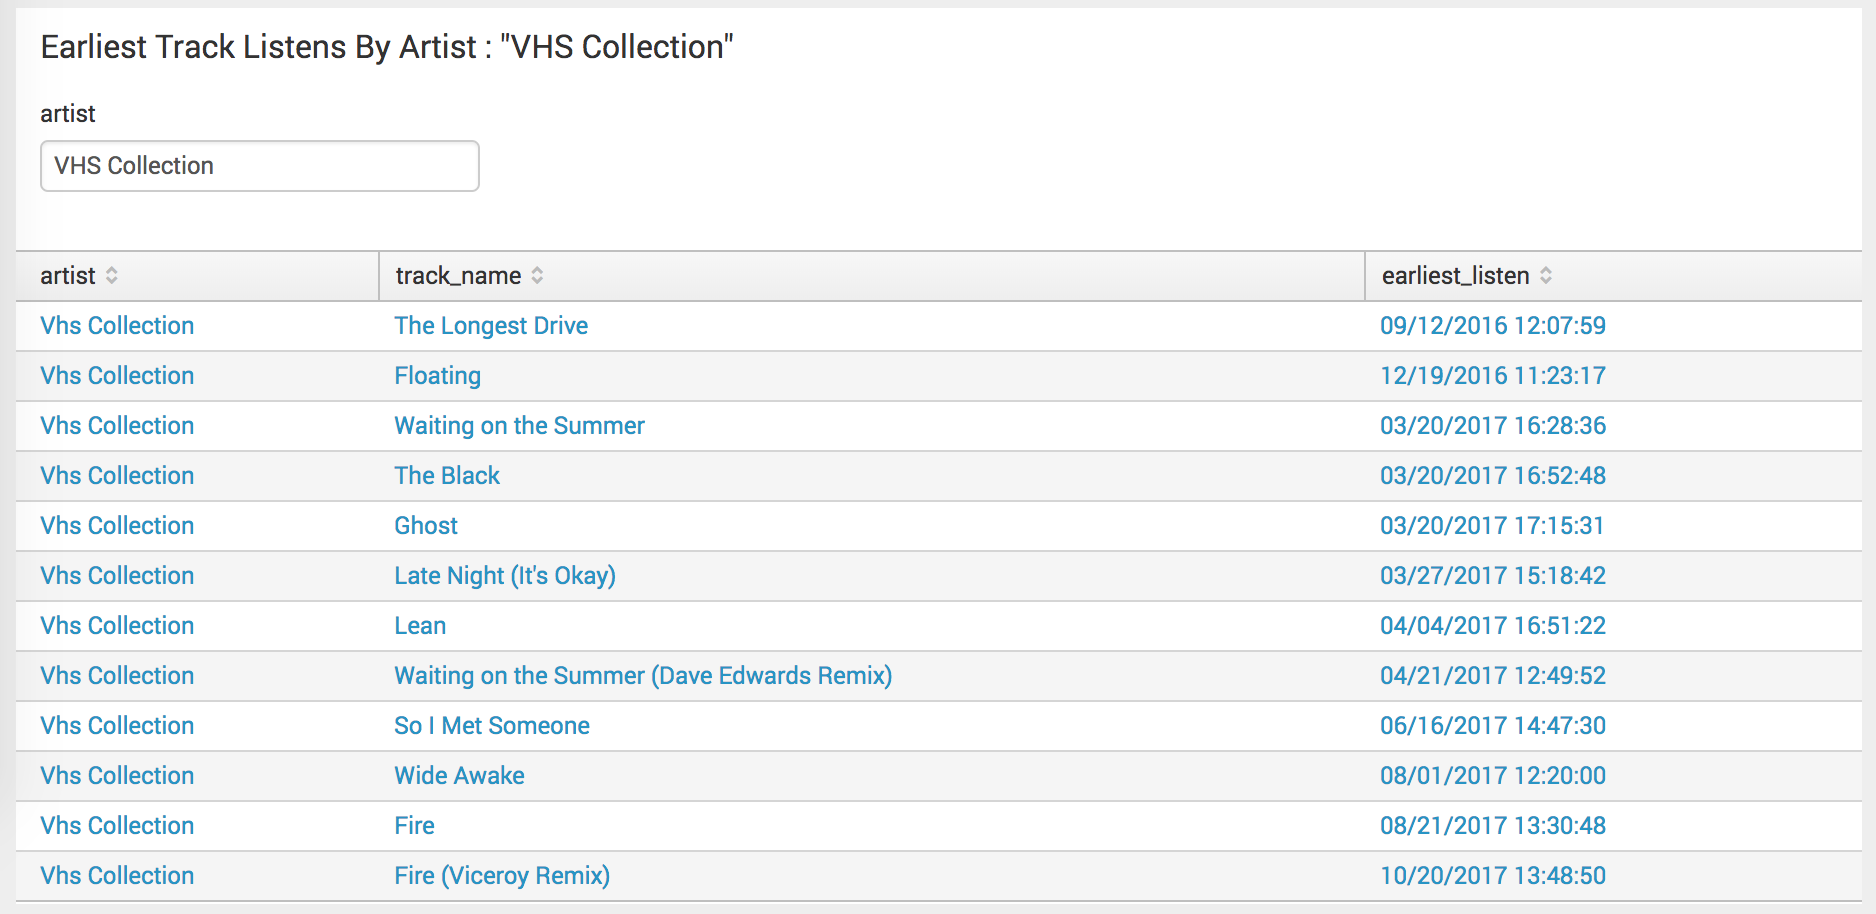 Screen image of a chart showing the earliest listens of tracks by the band VHS collection.